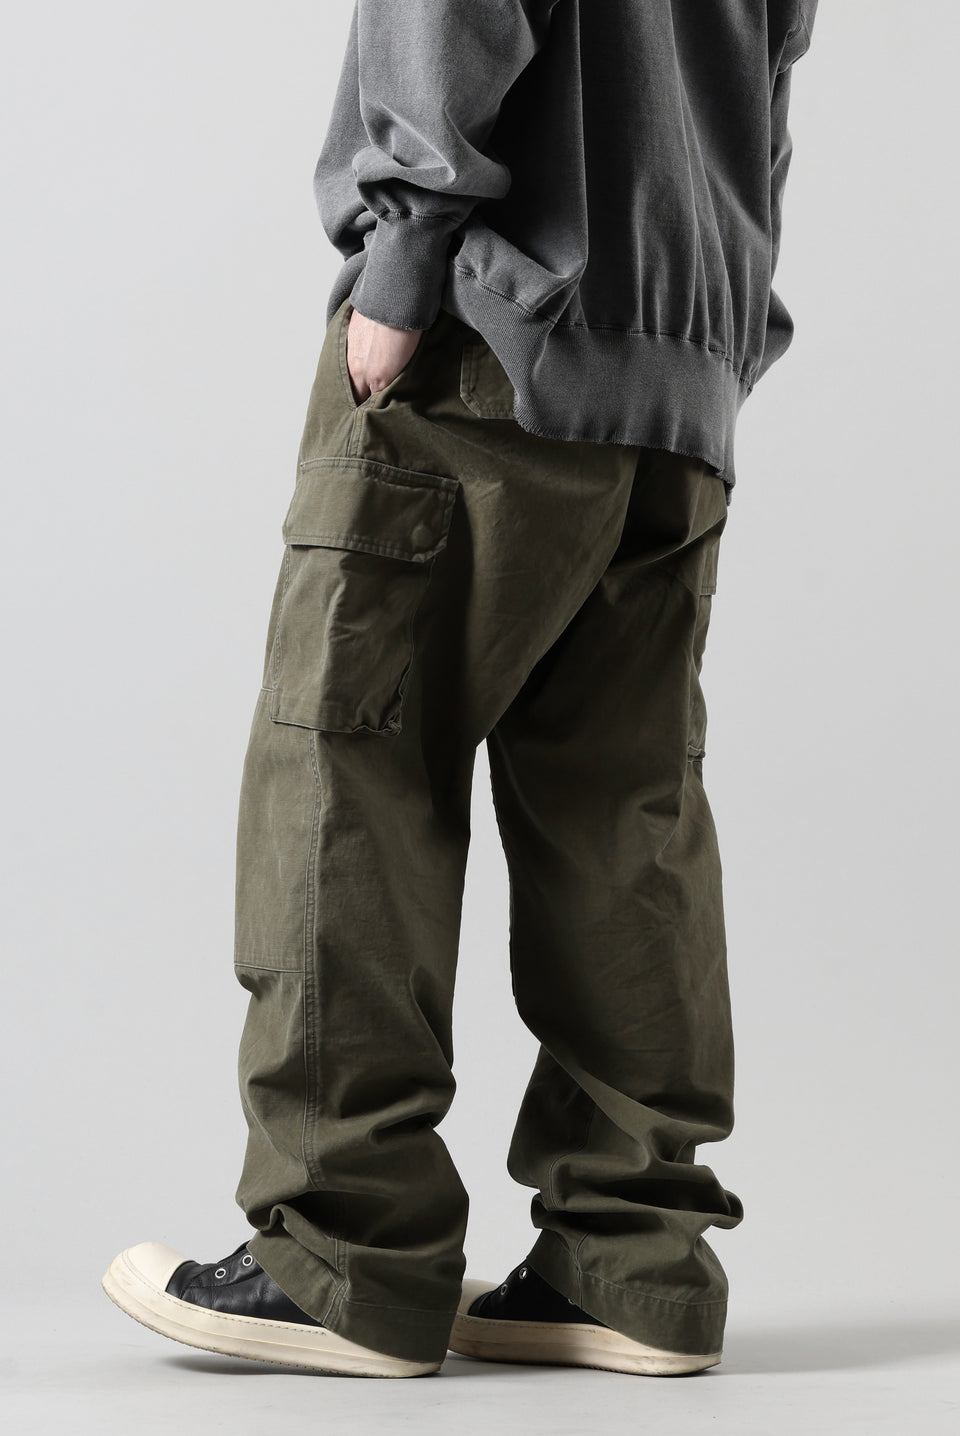 Load image into Gallery viewer, N/07 MILITARY TROUSERS M47 / BIO WASHED LIGHT-WEIGHT DUCK (OLIVE)